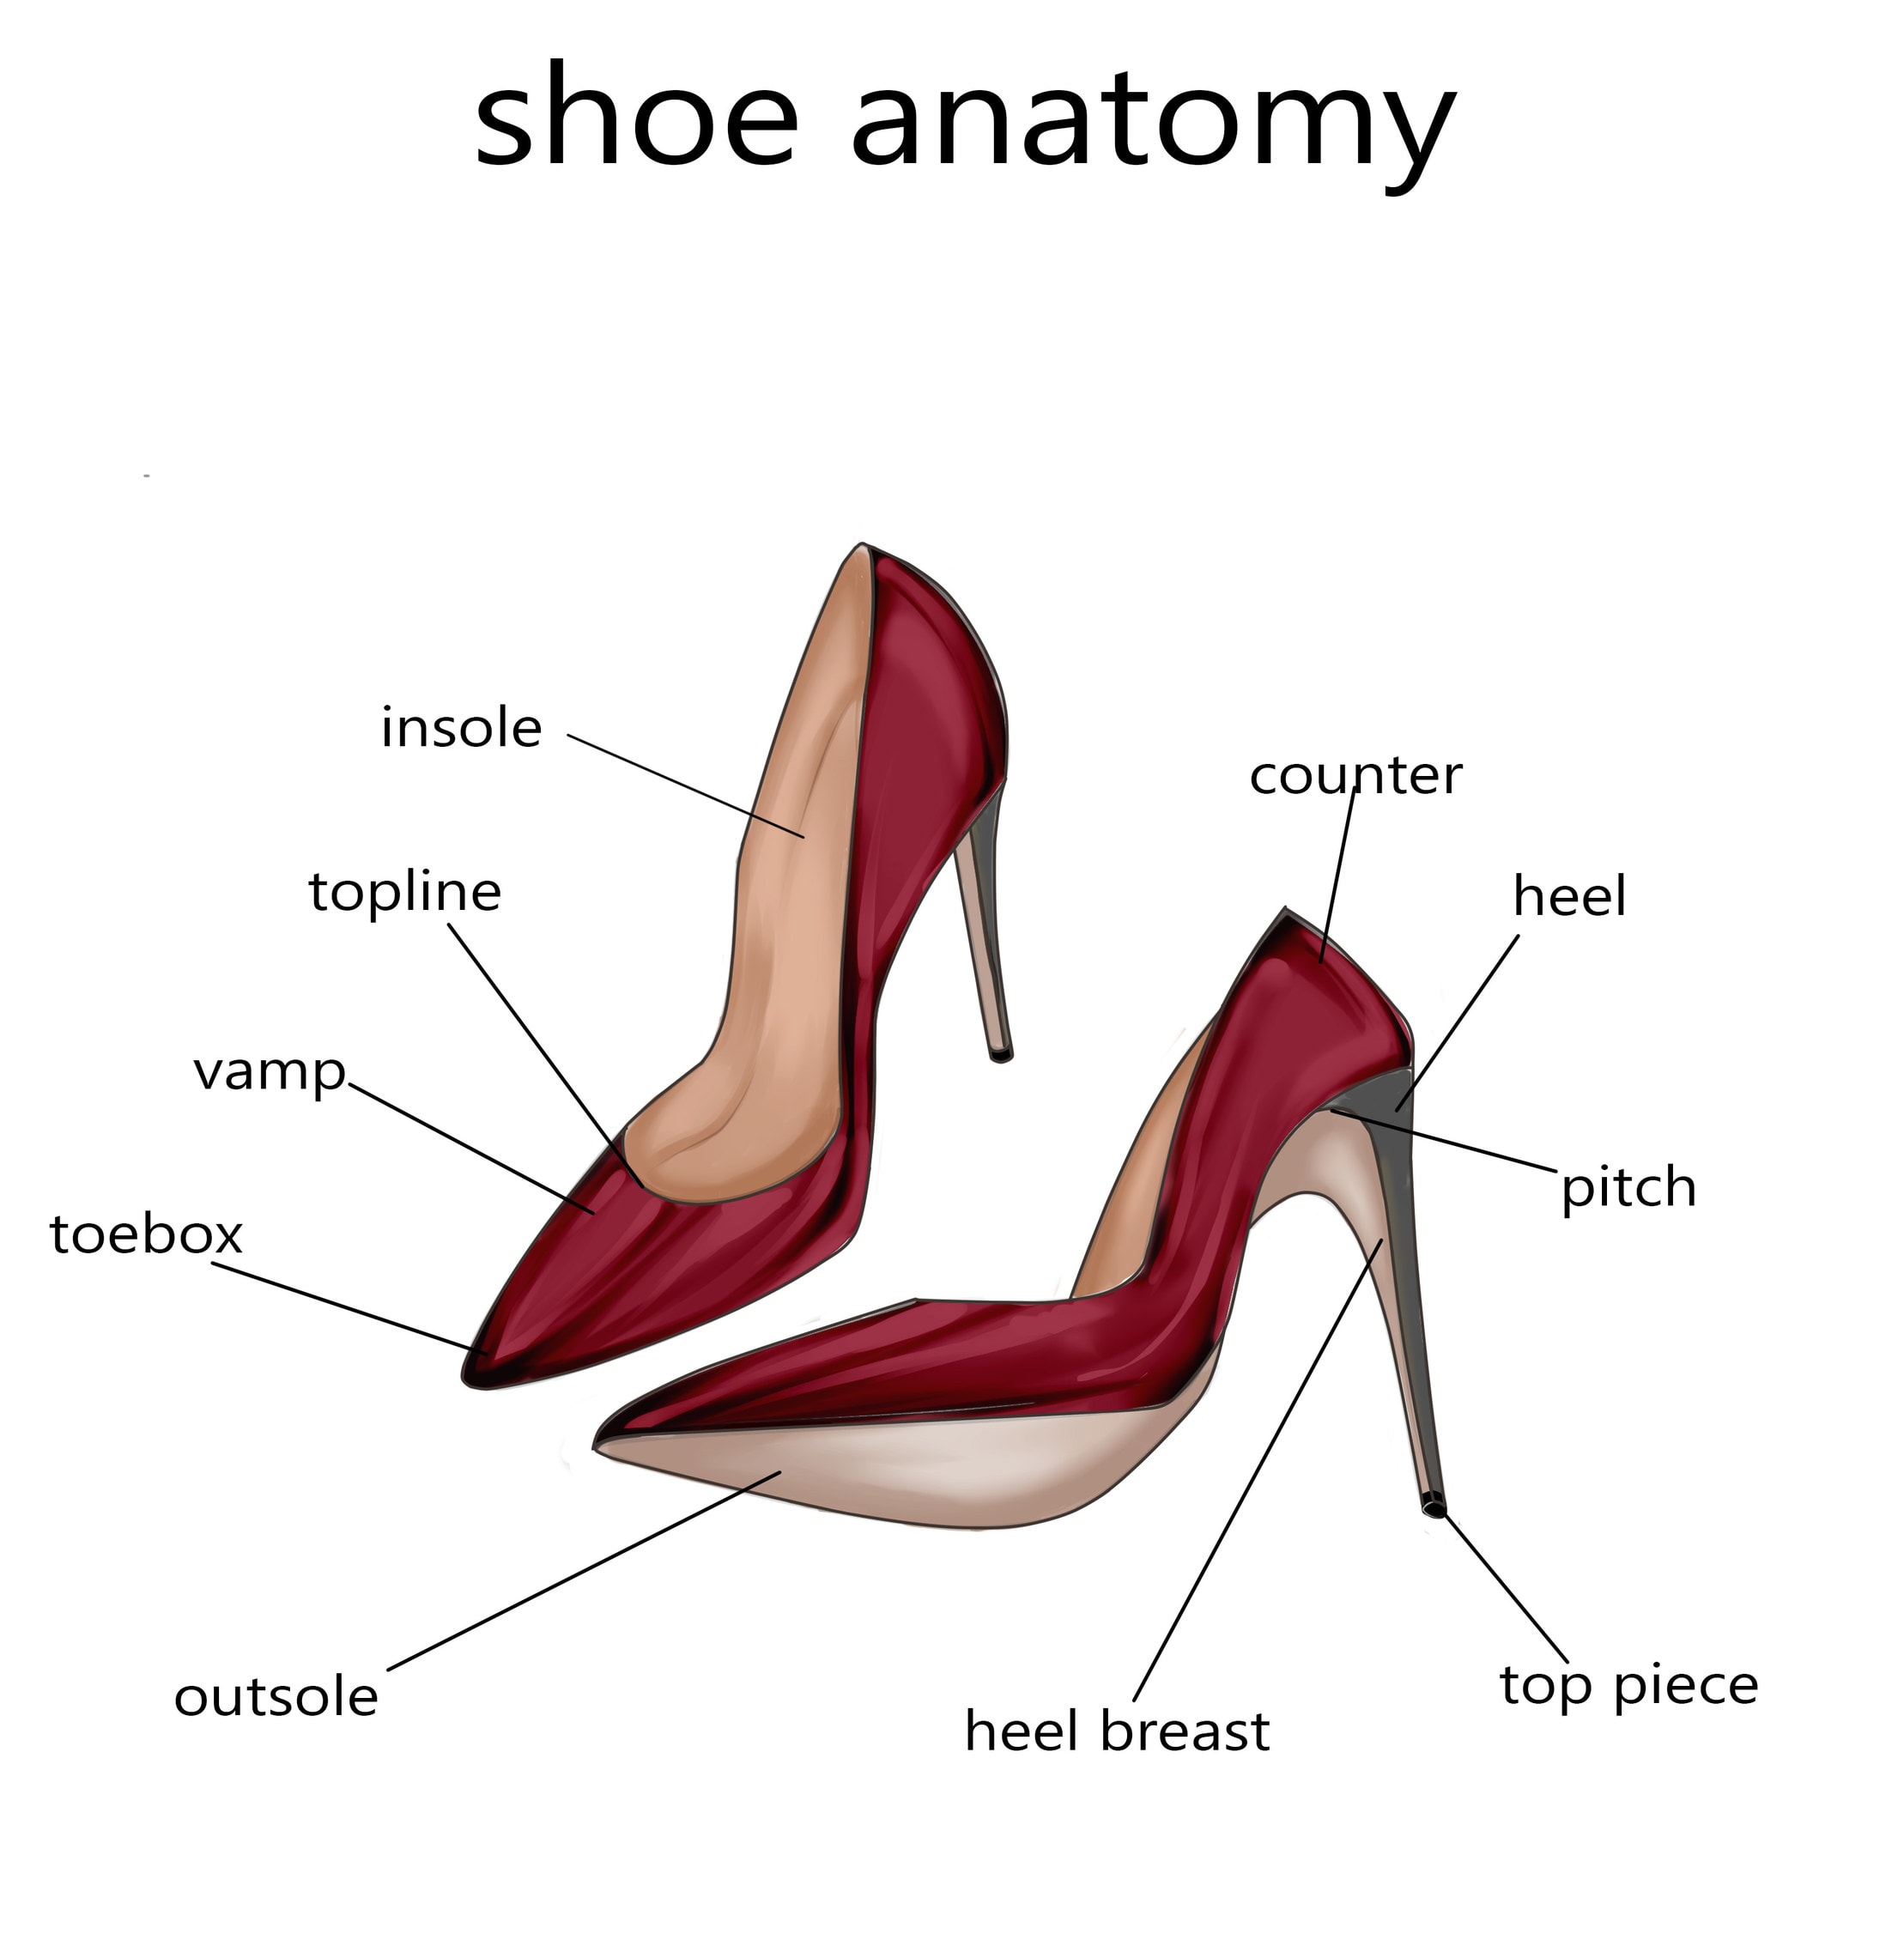 Ultimate High Heel Anatomy Guide 19 Main Parts Of A High Heel | vlr.eng.br